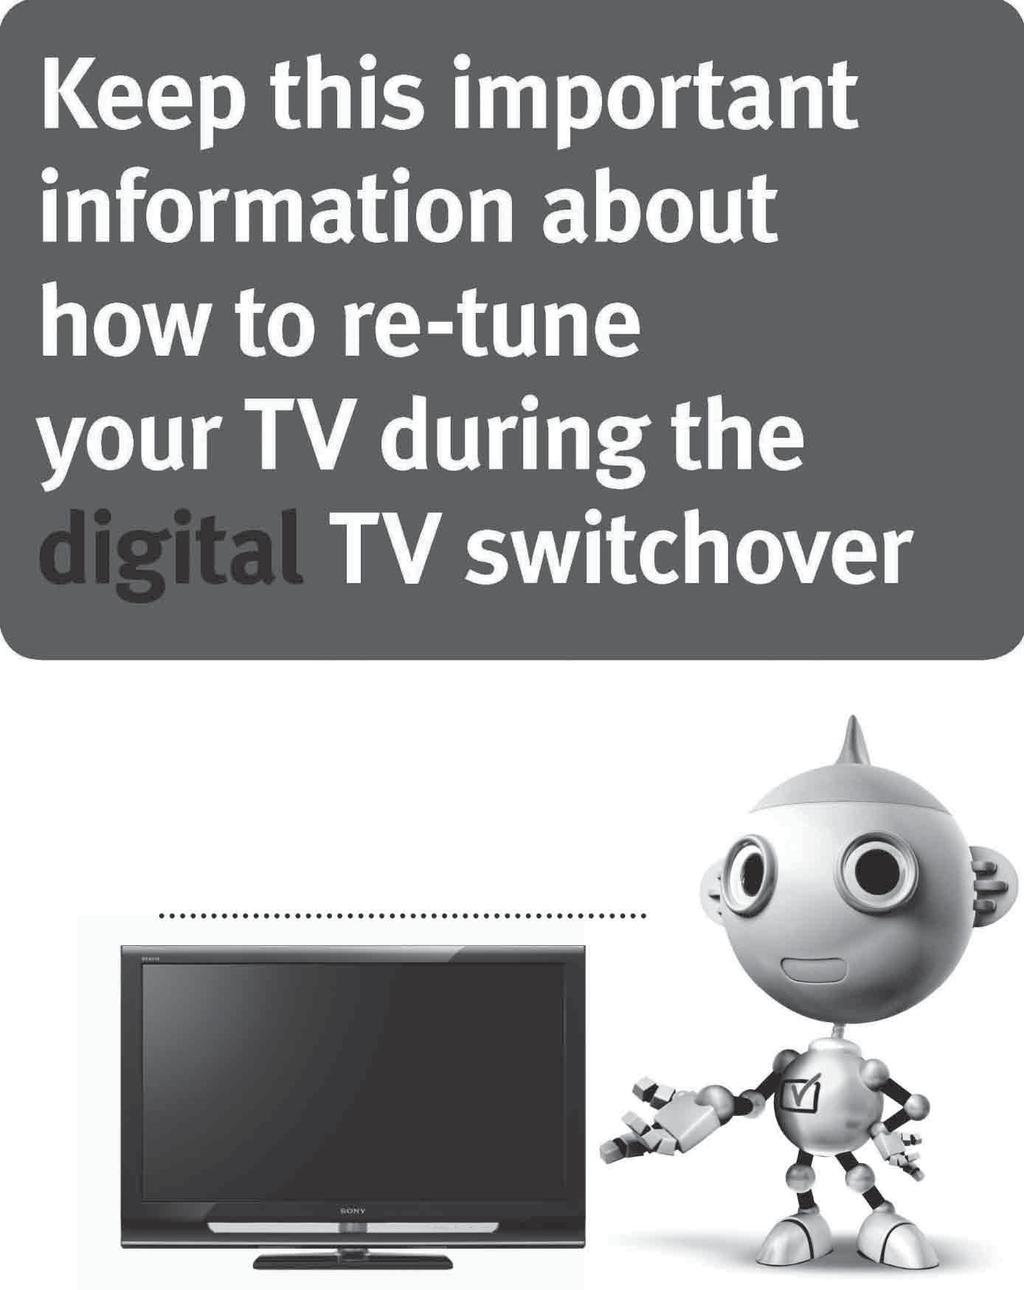 Television in the UK is going digital, bringing us all more choice and new services.